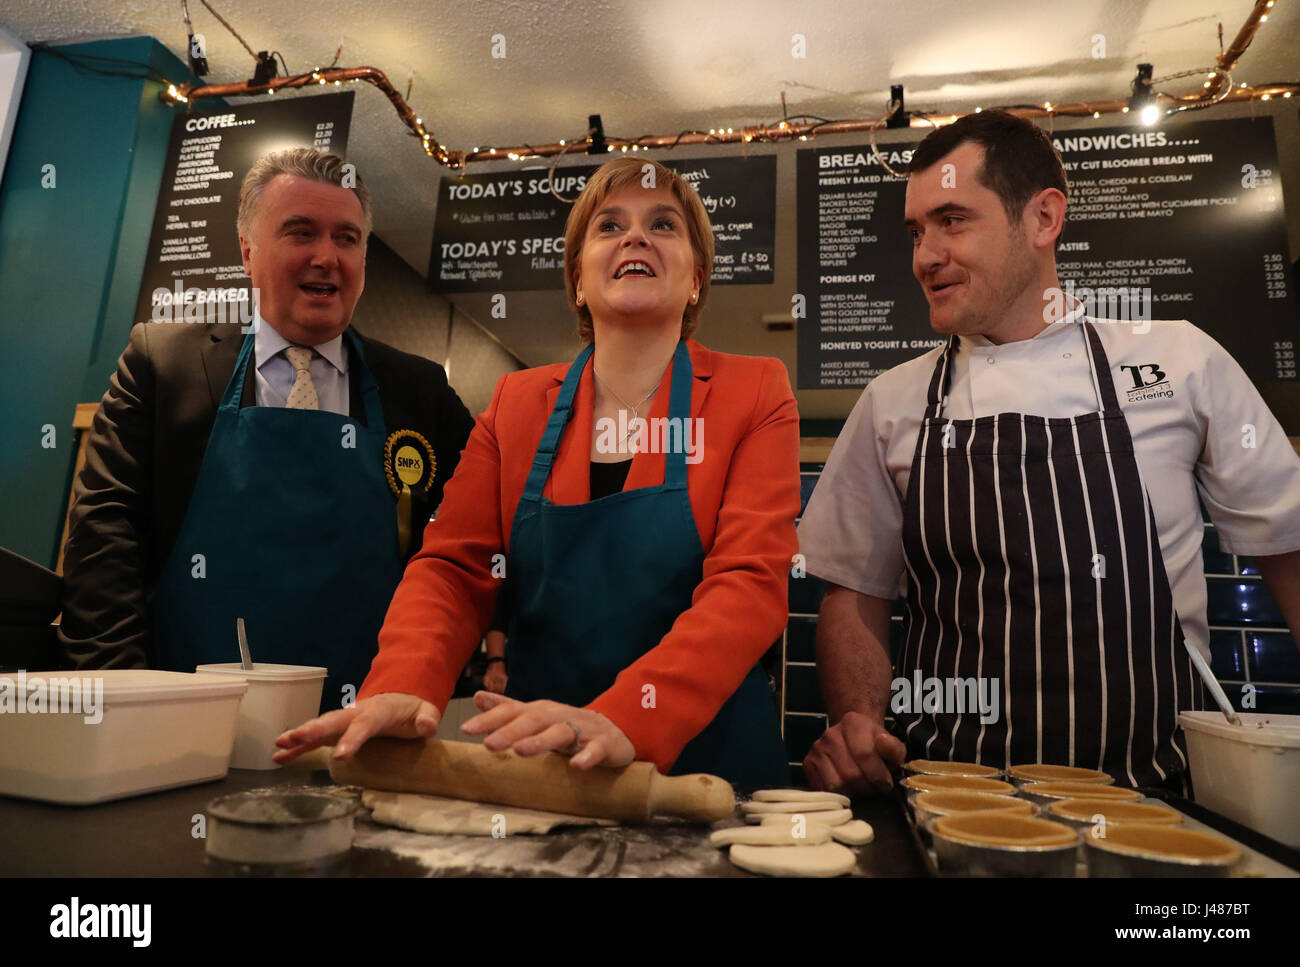 SNP Leader Nicola Sturgeon and the party's local candidate John Nicolson (left) making haggis pies with Table 13 Express co-owner Iain Murphy on a campaign visit to the cafe in Kirkintilloch, East Dunbartonshire. Stock Photo